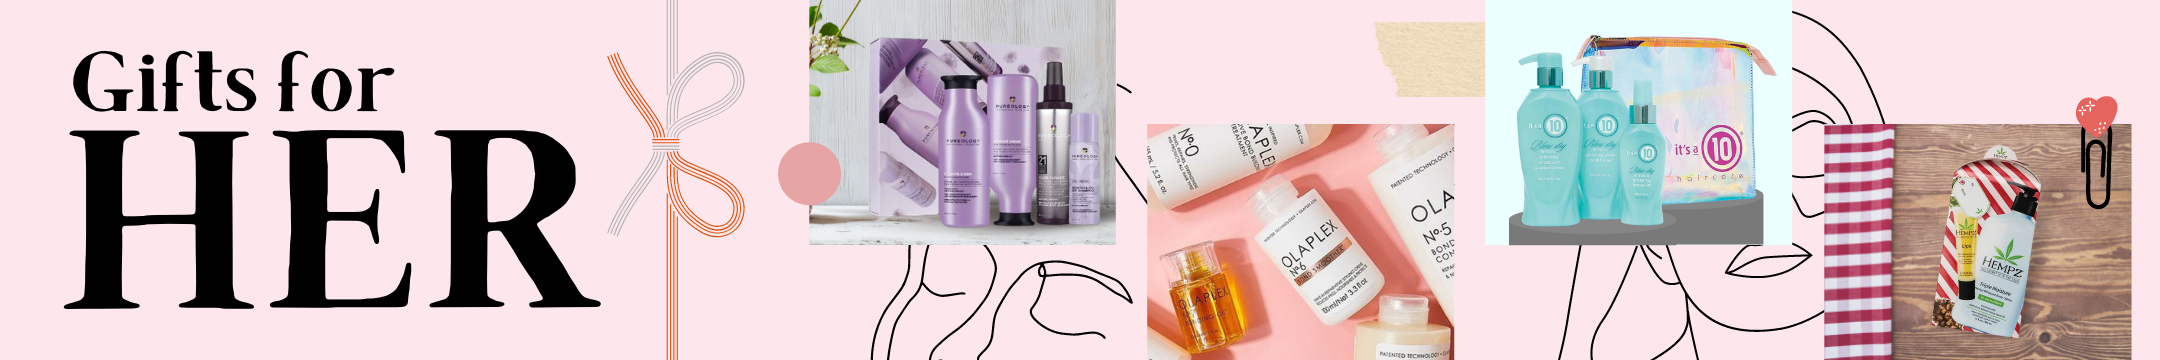 GIFT IDEAS FOR HER HAIR, SKIN, AND LIP CARE